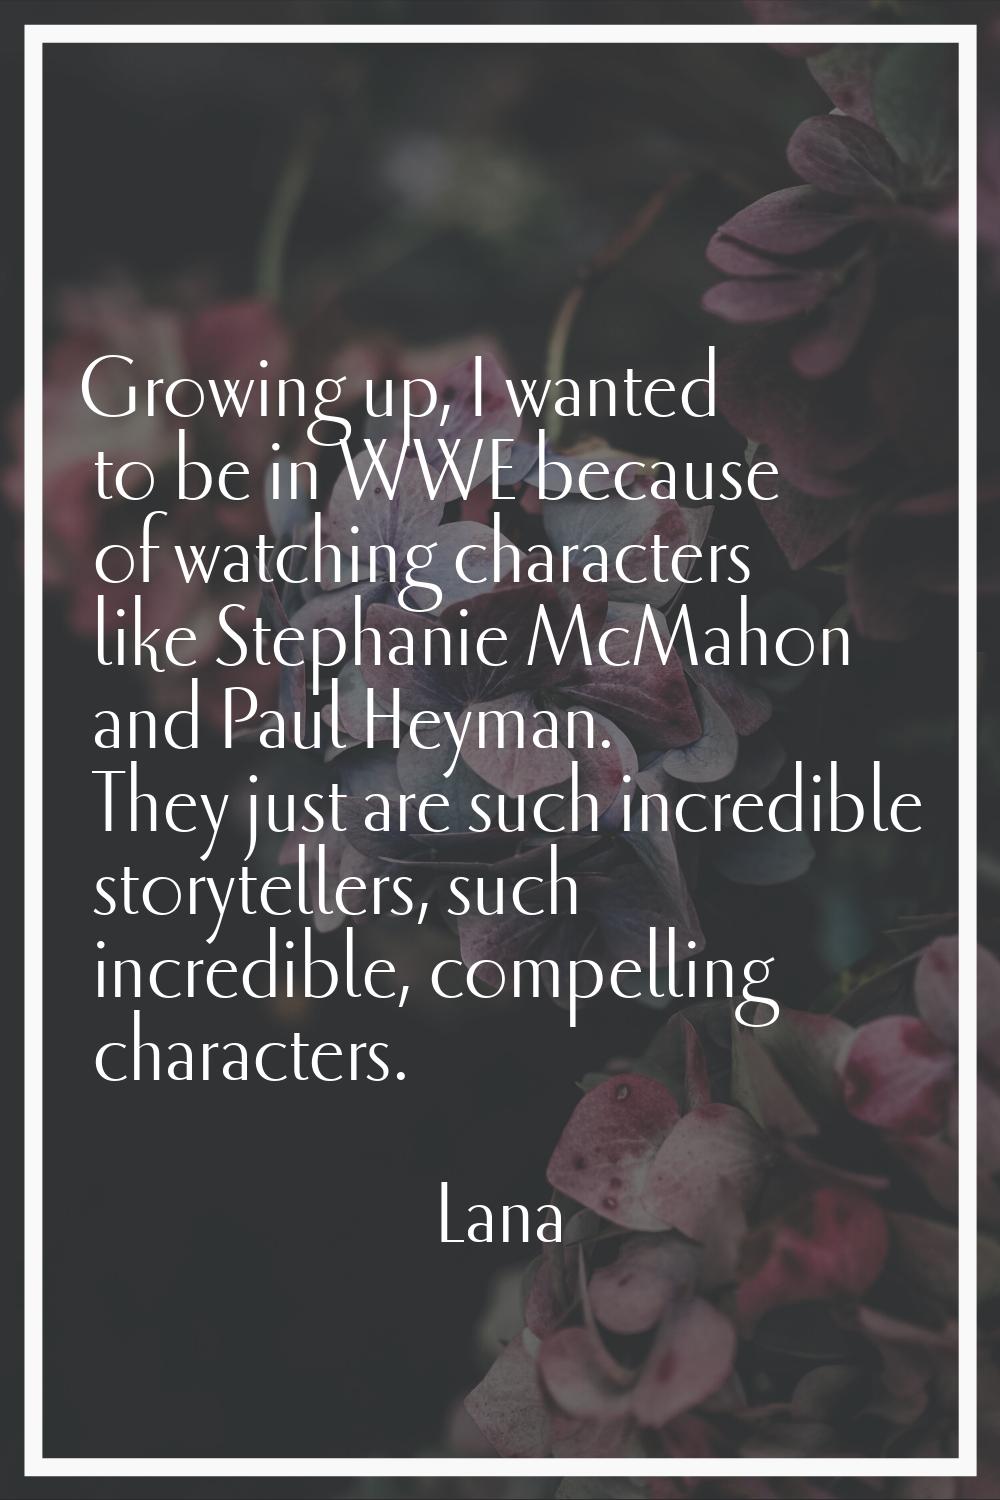 Growing up, I wanted to be in WWE because of watching characters like Stephanie McMahon and Paul He